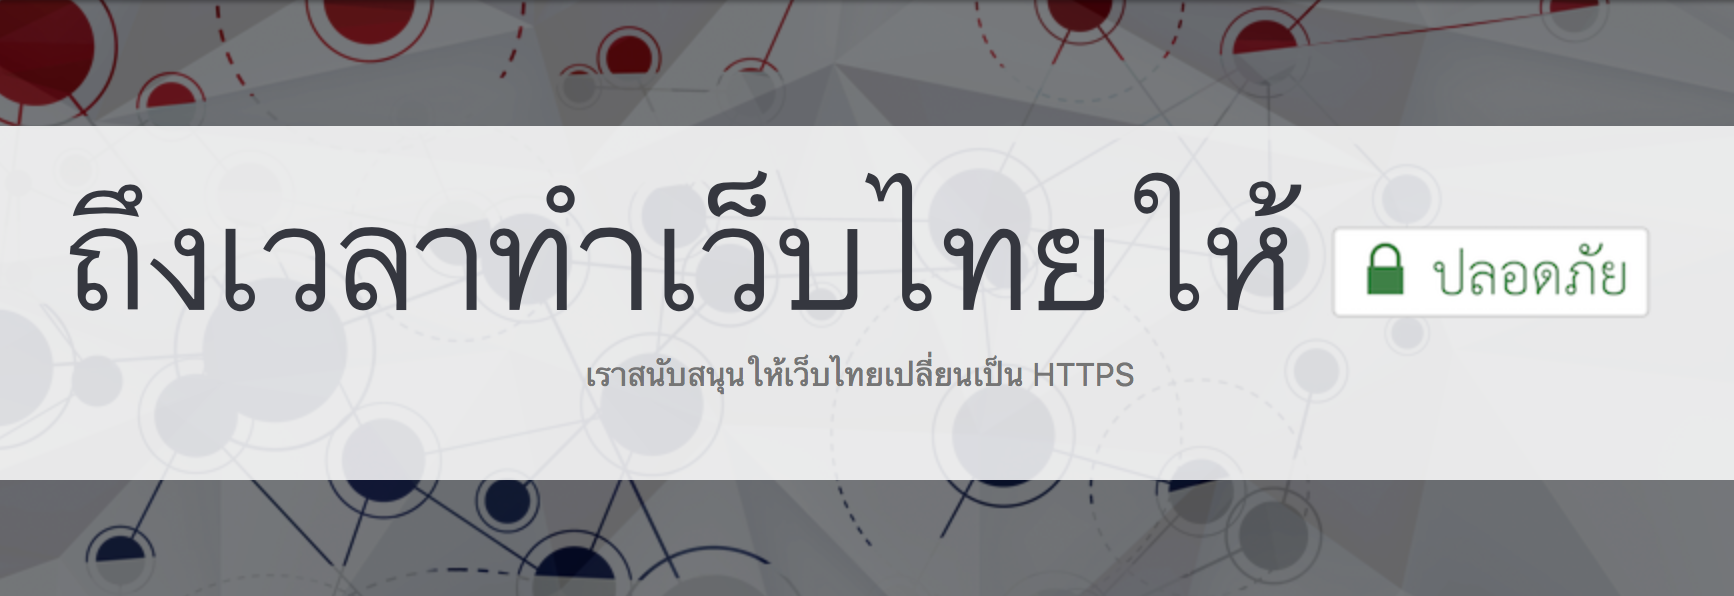 Cover Image for Secure The Web Thailand